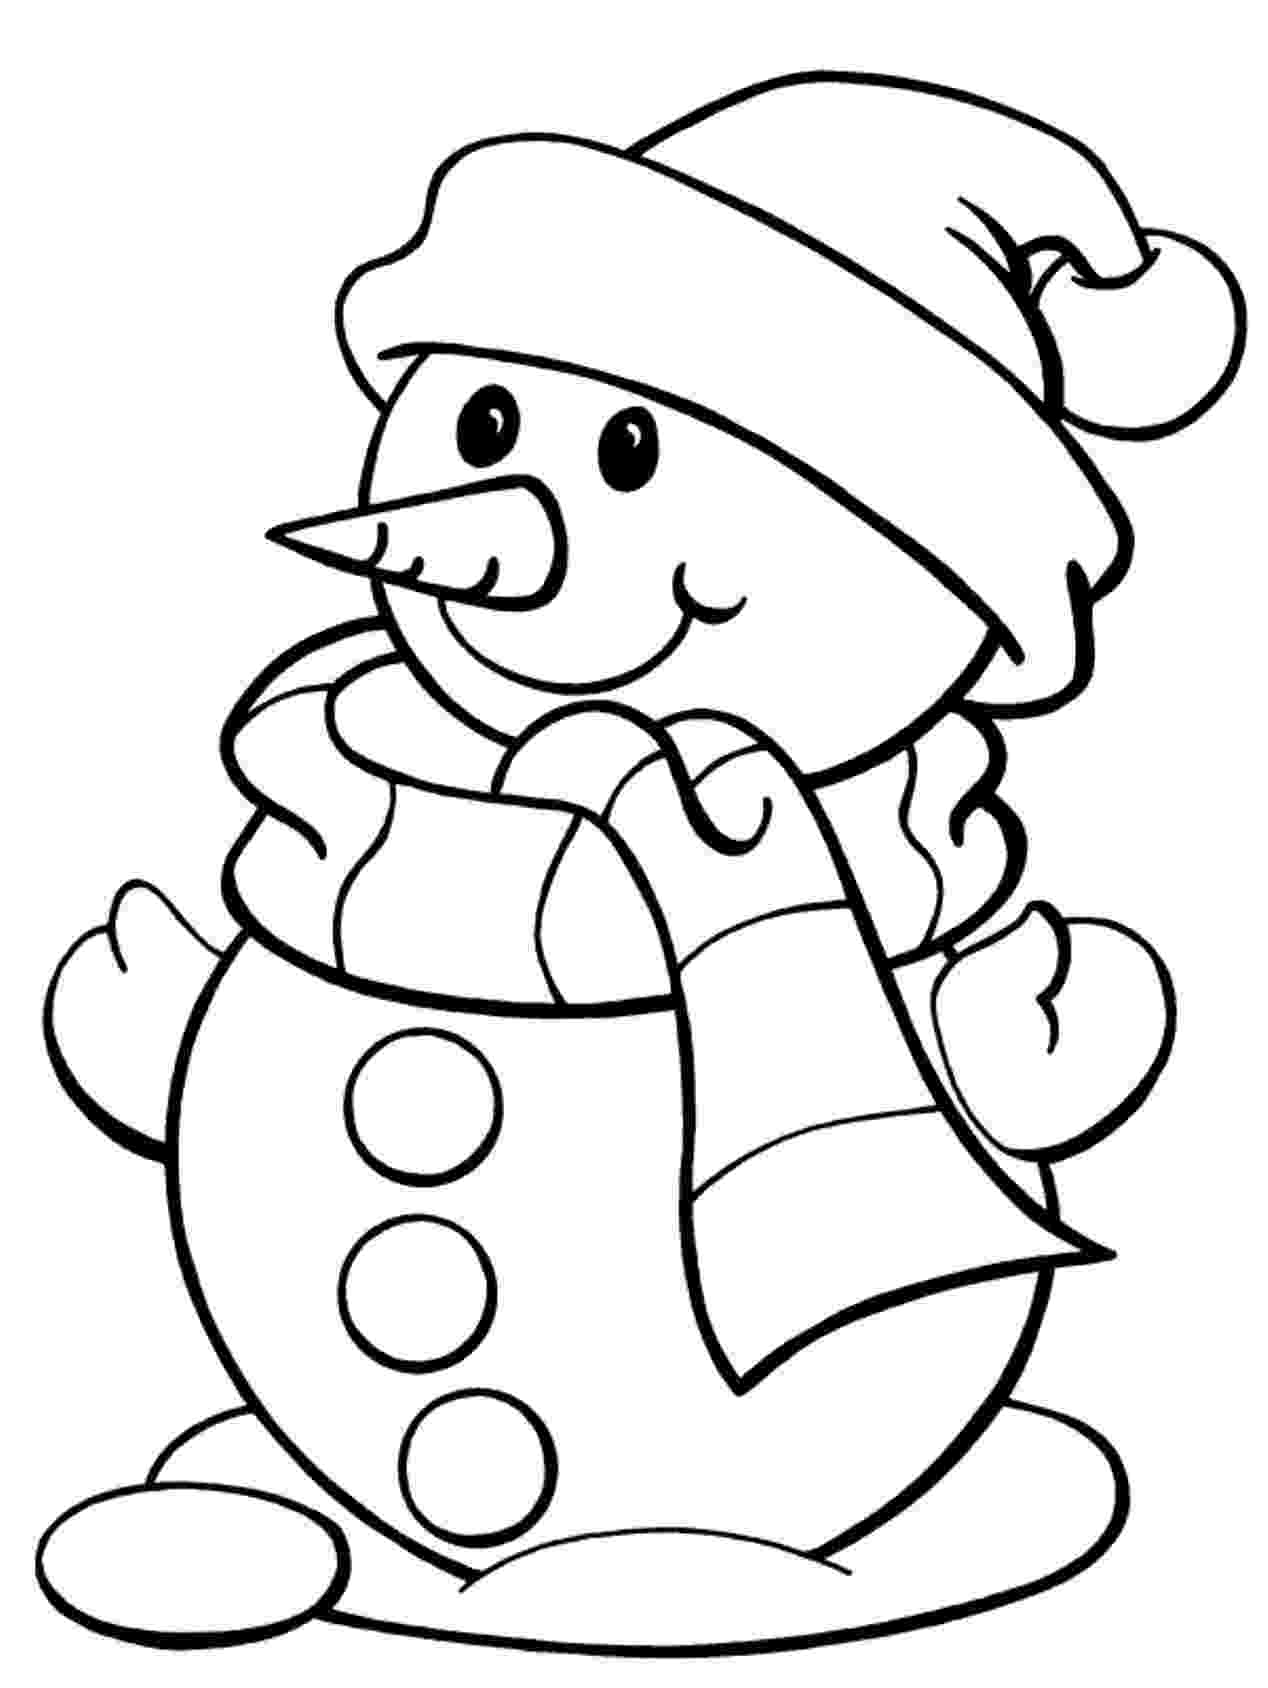 winter coloring pages season and weather coloring pages momjunction winter coloring pages 